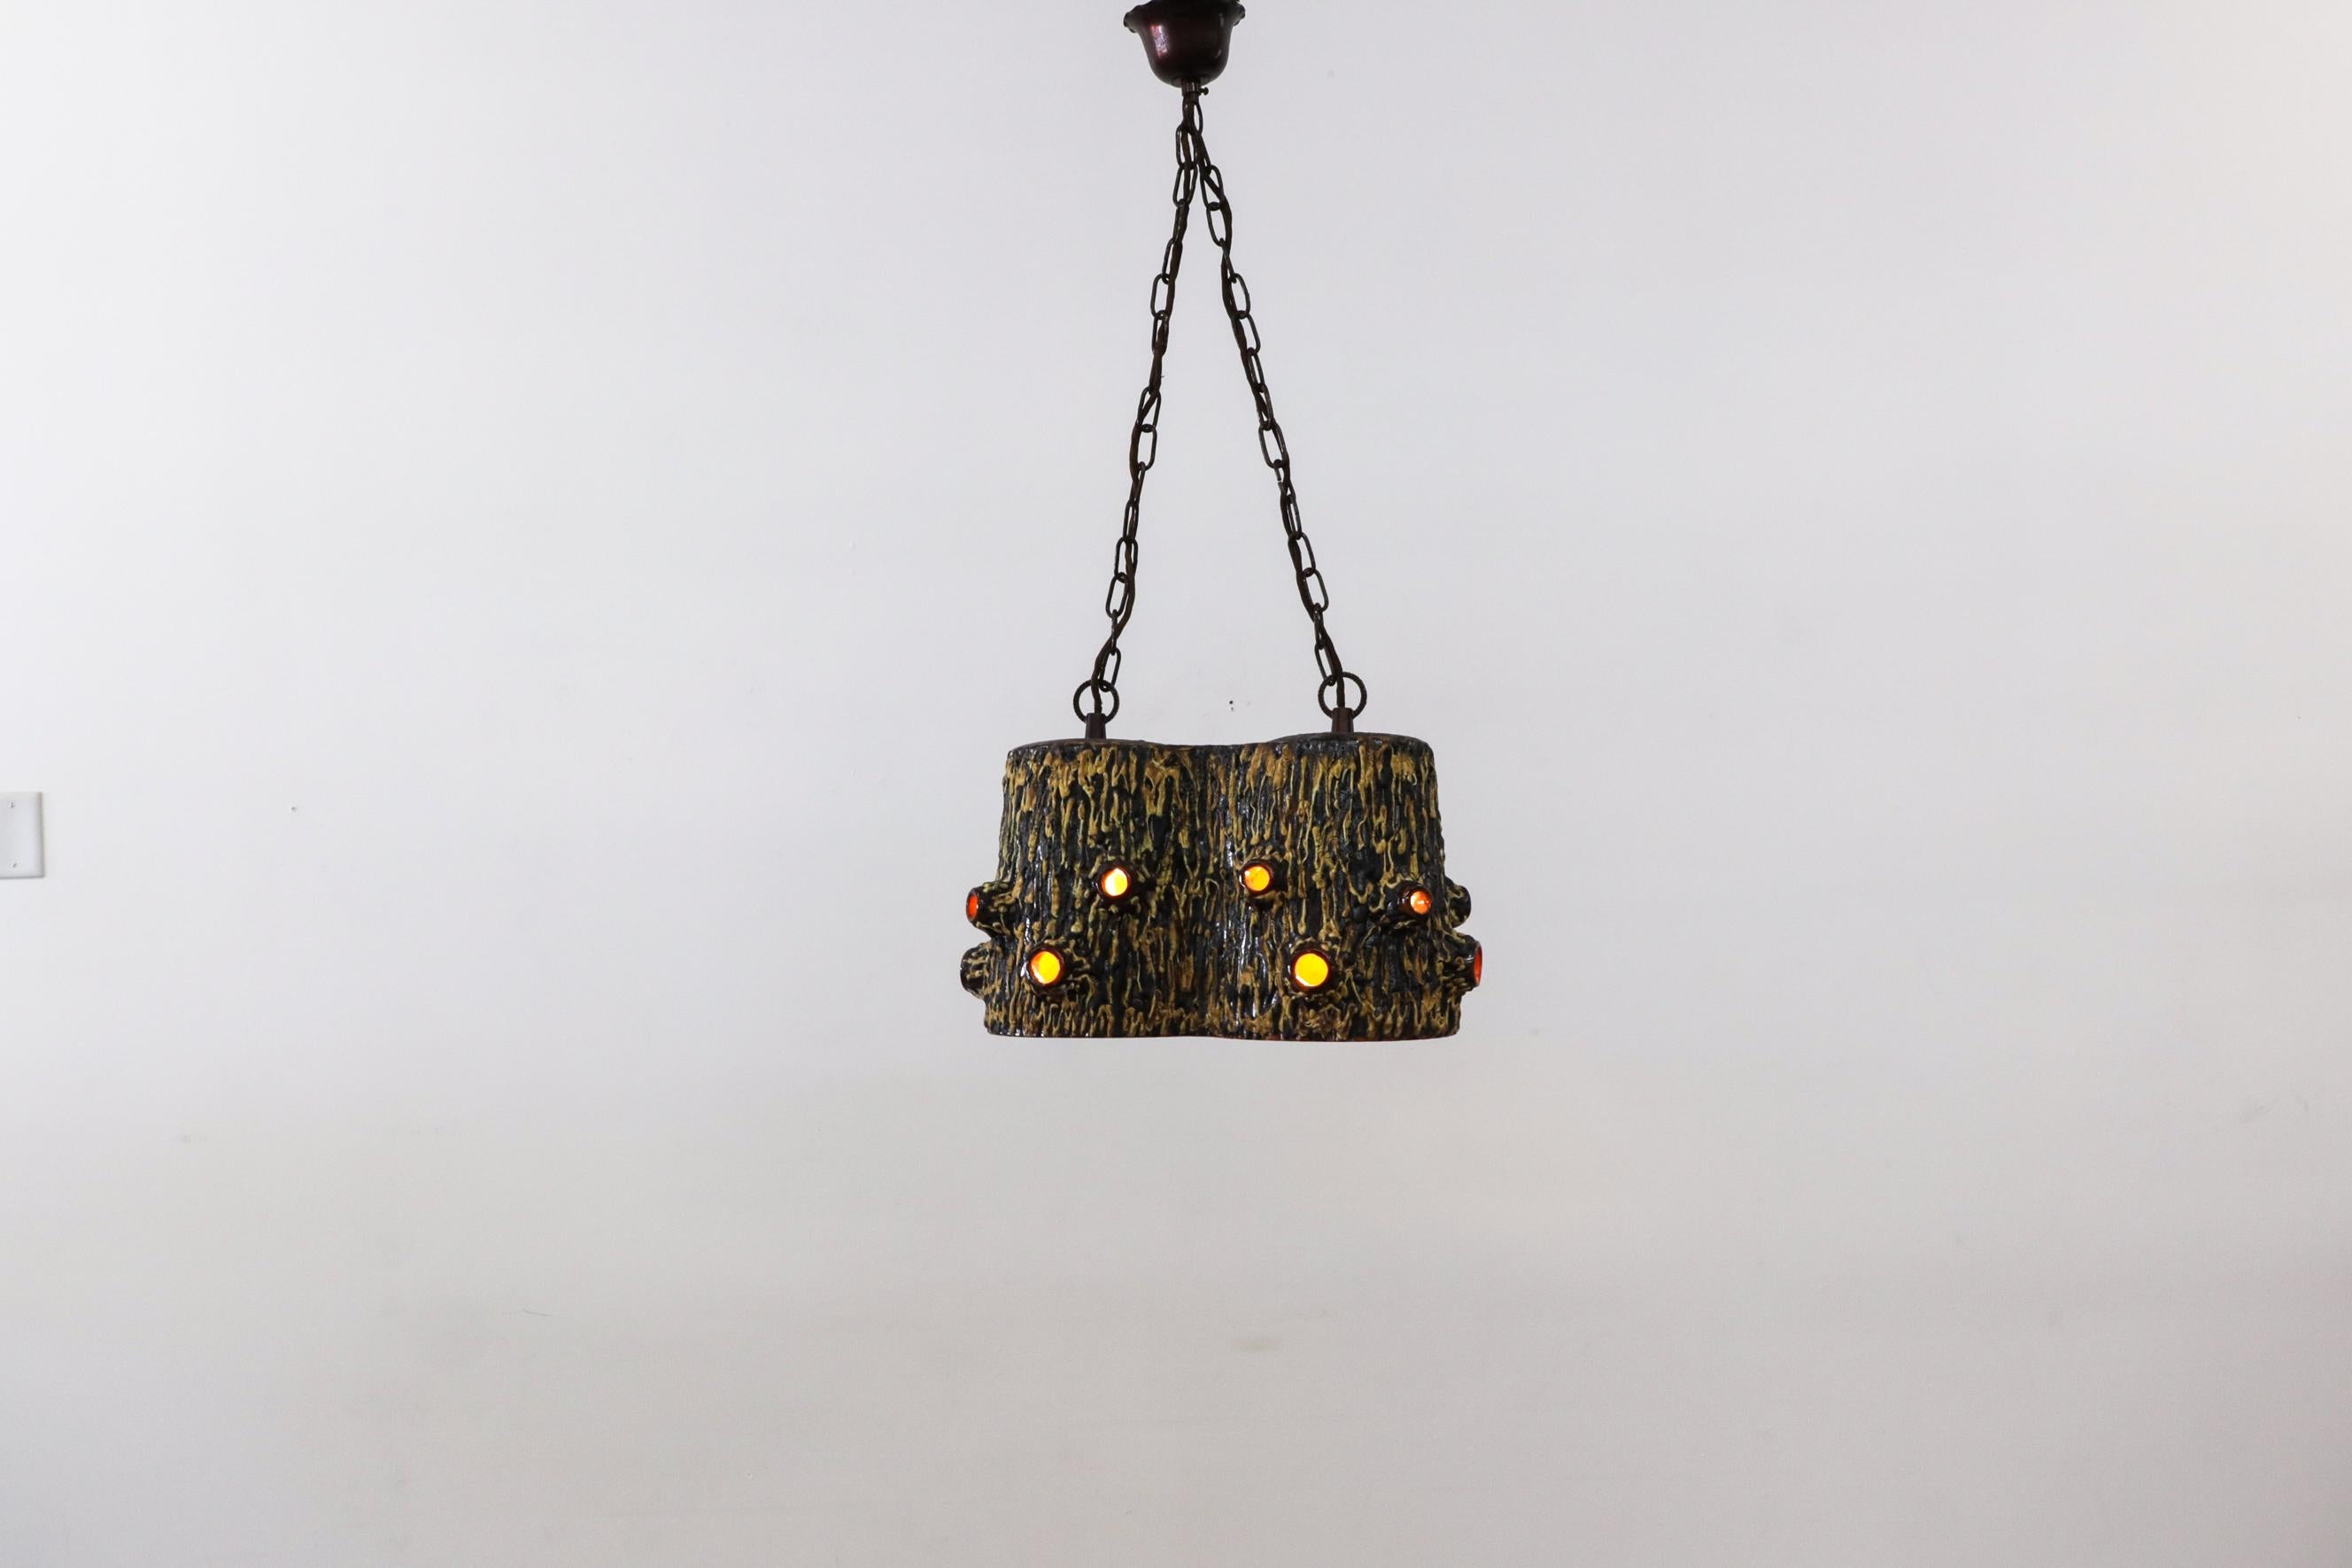 Beautiful, organic shaped ceramic chandelier with bark textured outside and bright orange glazed interior. This heavy ceramic pendant light is held by brutalist style double chain hardware and matching canopy. The amoeba-like fixture has a double